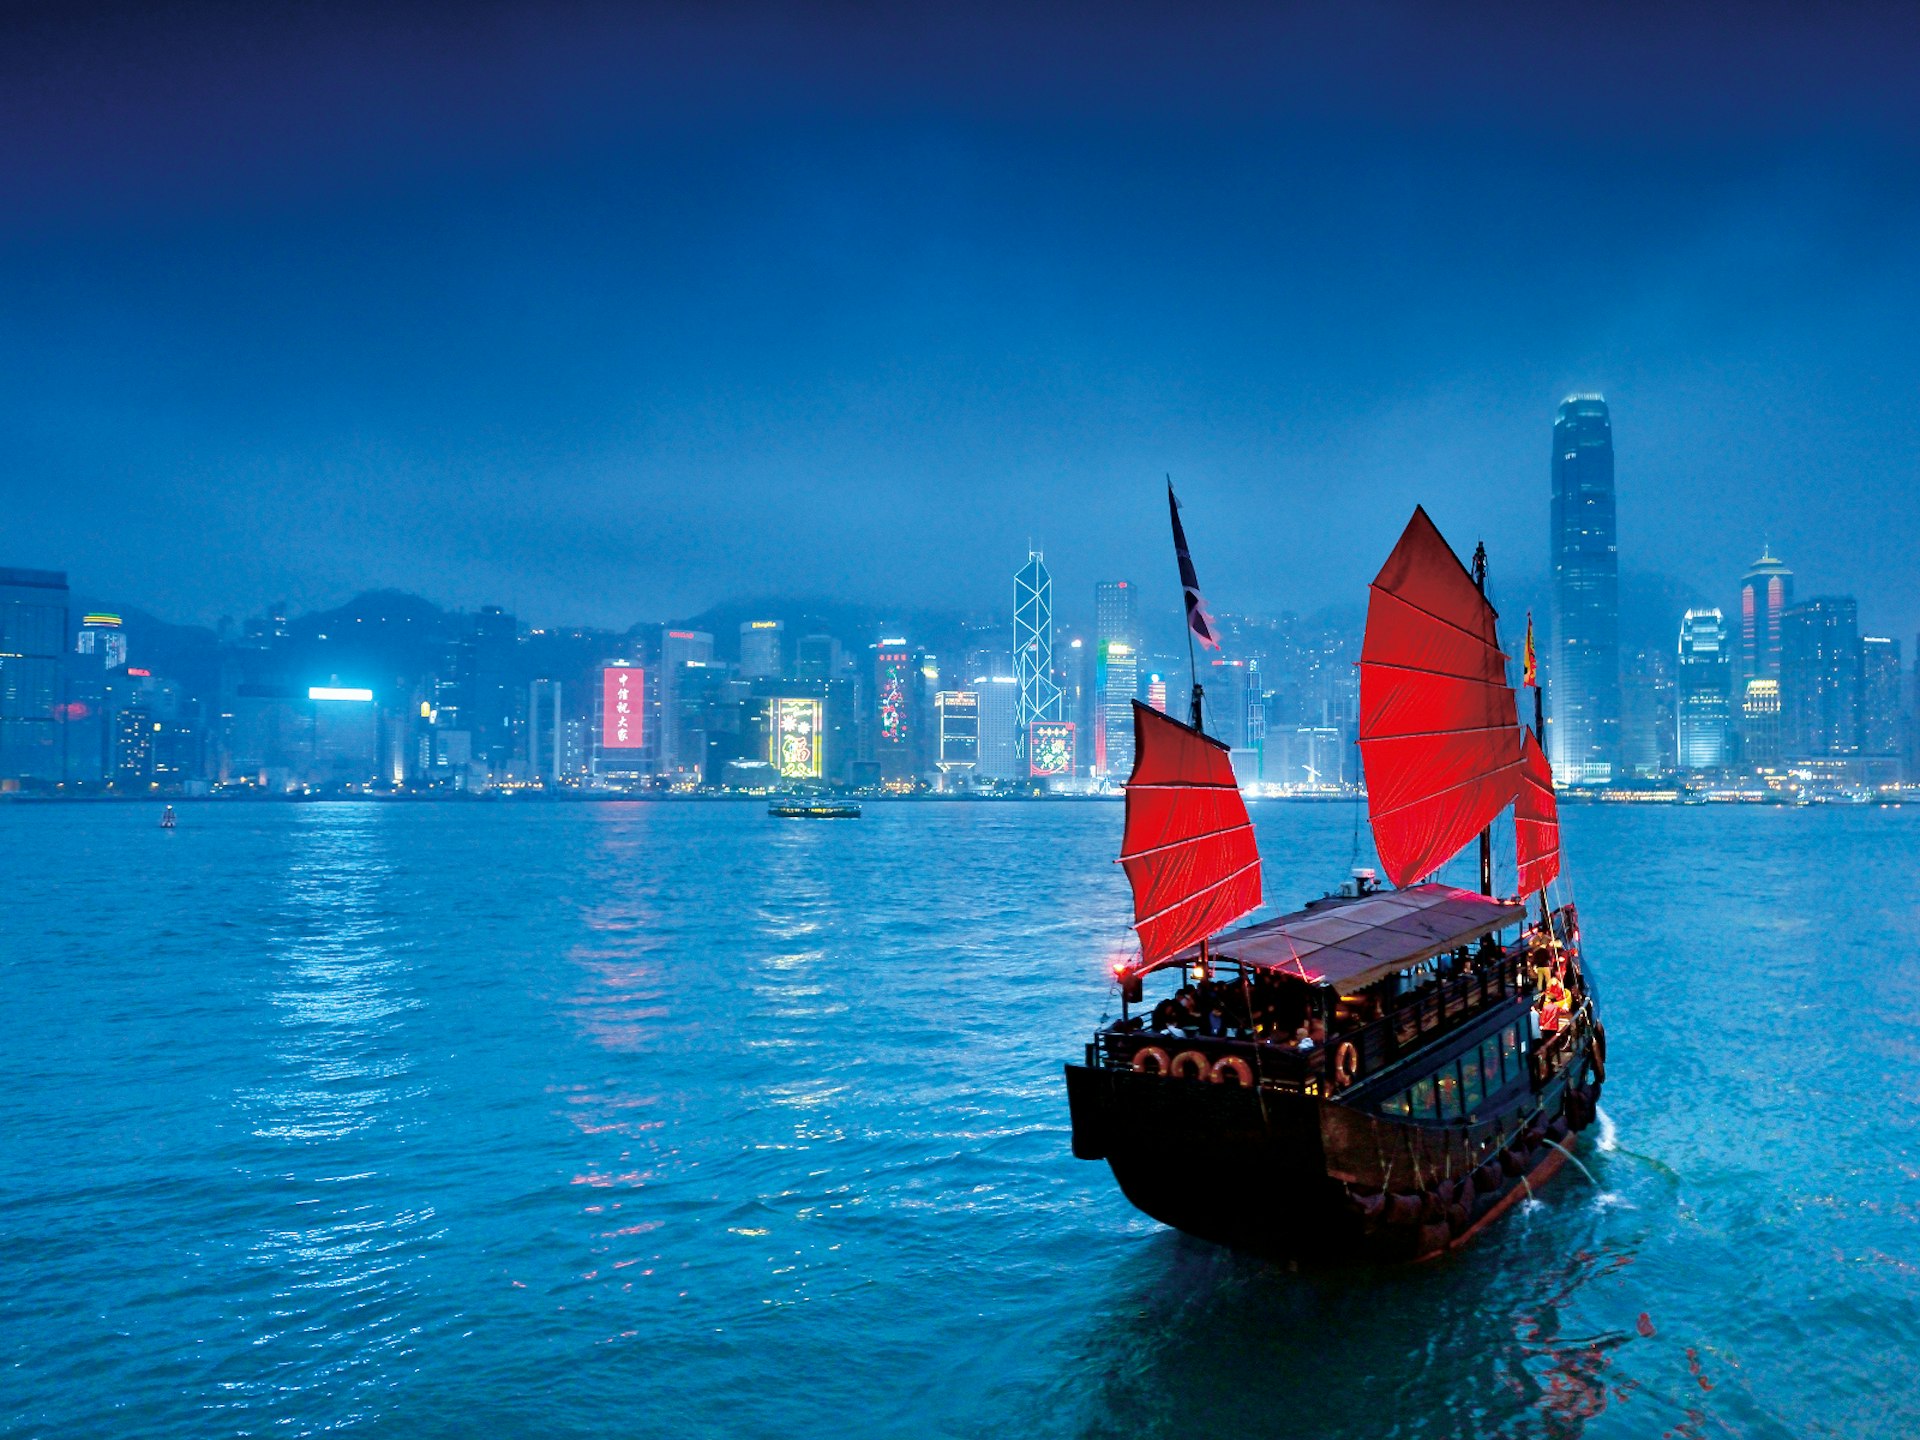 A traditional Chinese junk boat glides across the mist-shrouded Hong Kong harbour